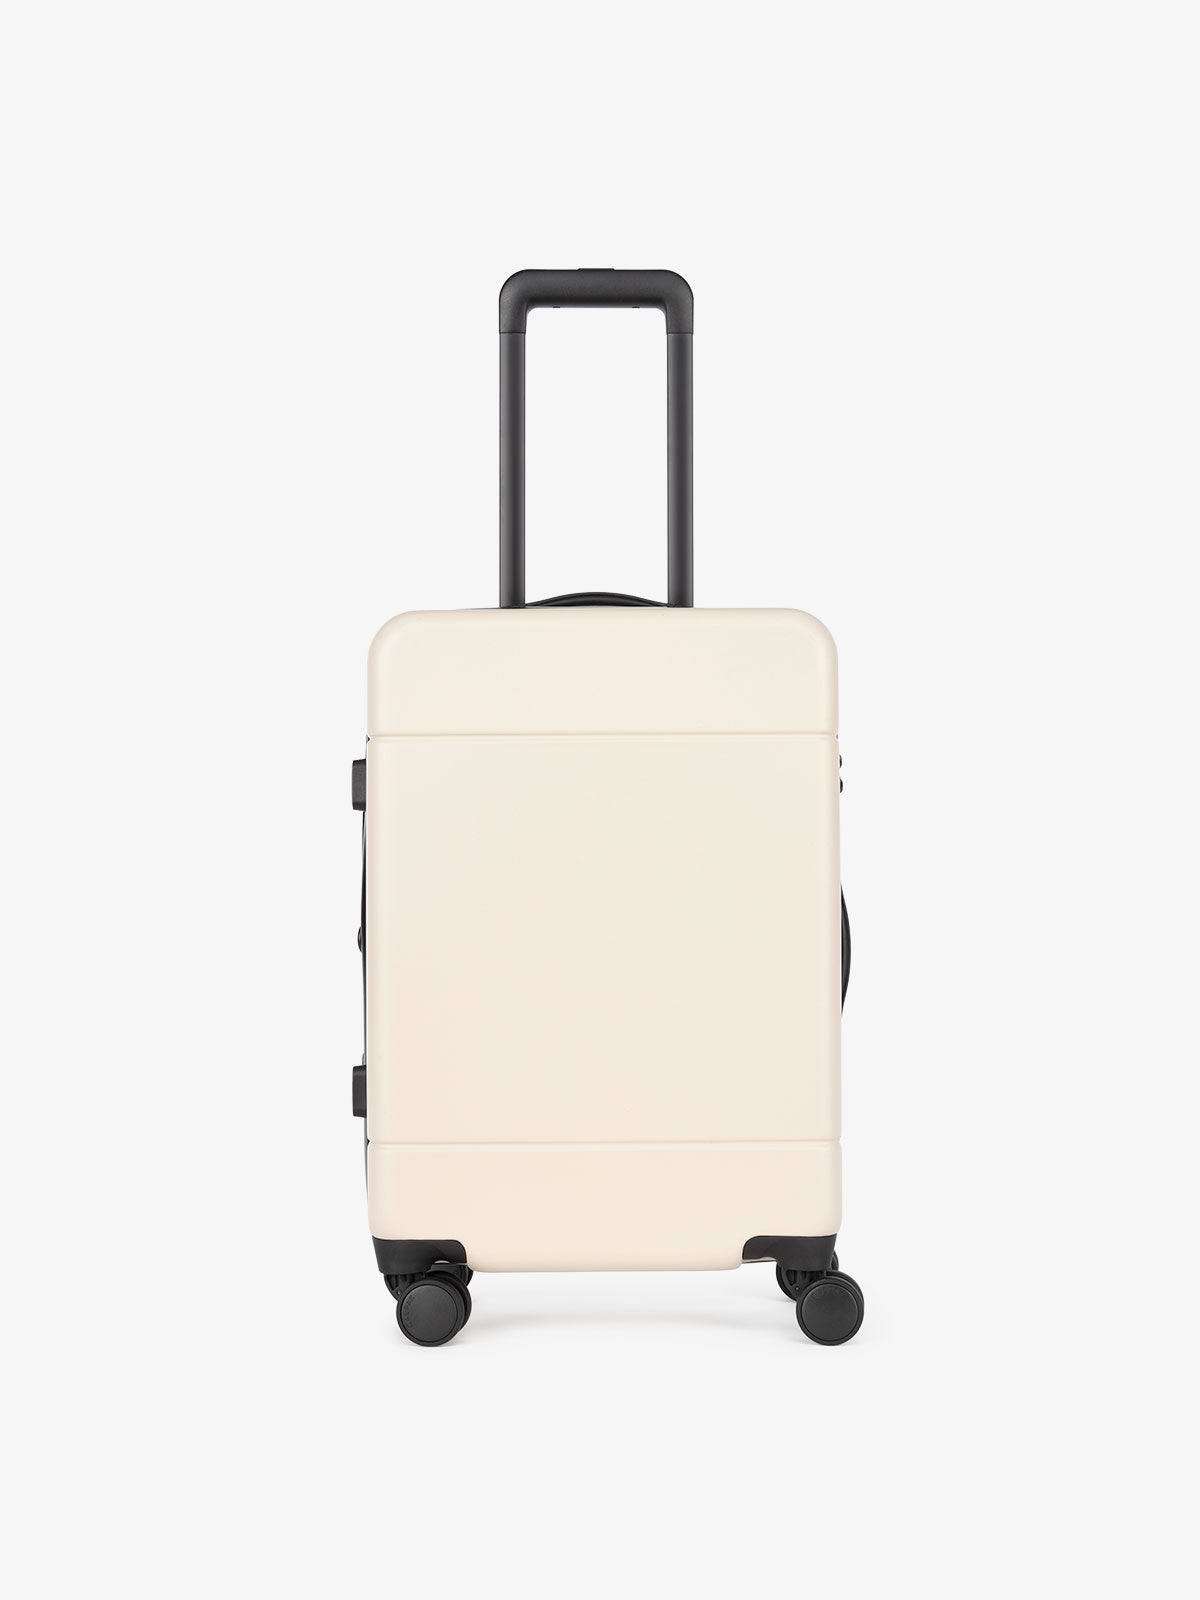 Trnk Mini Carry-On Luggage